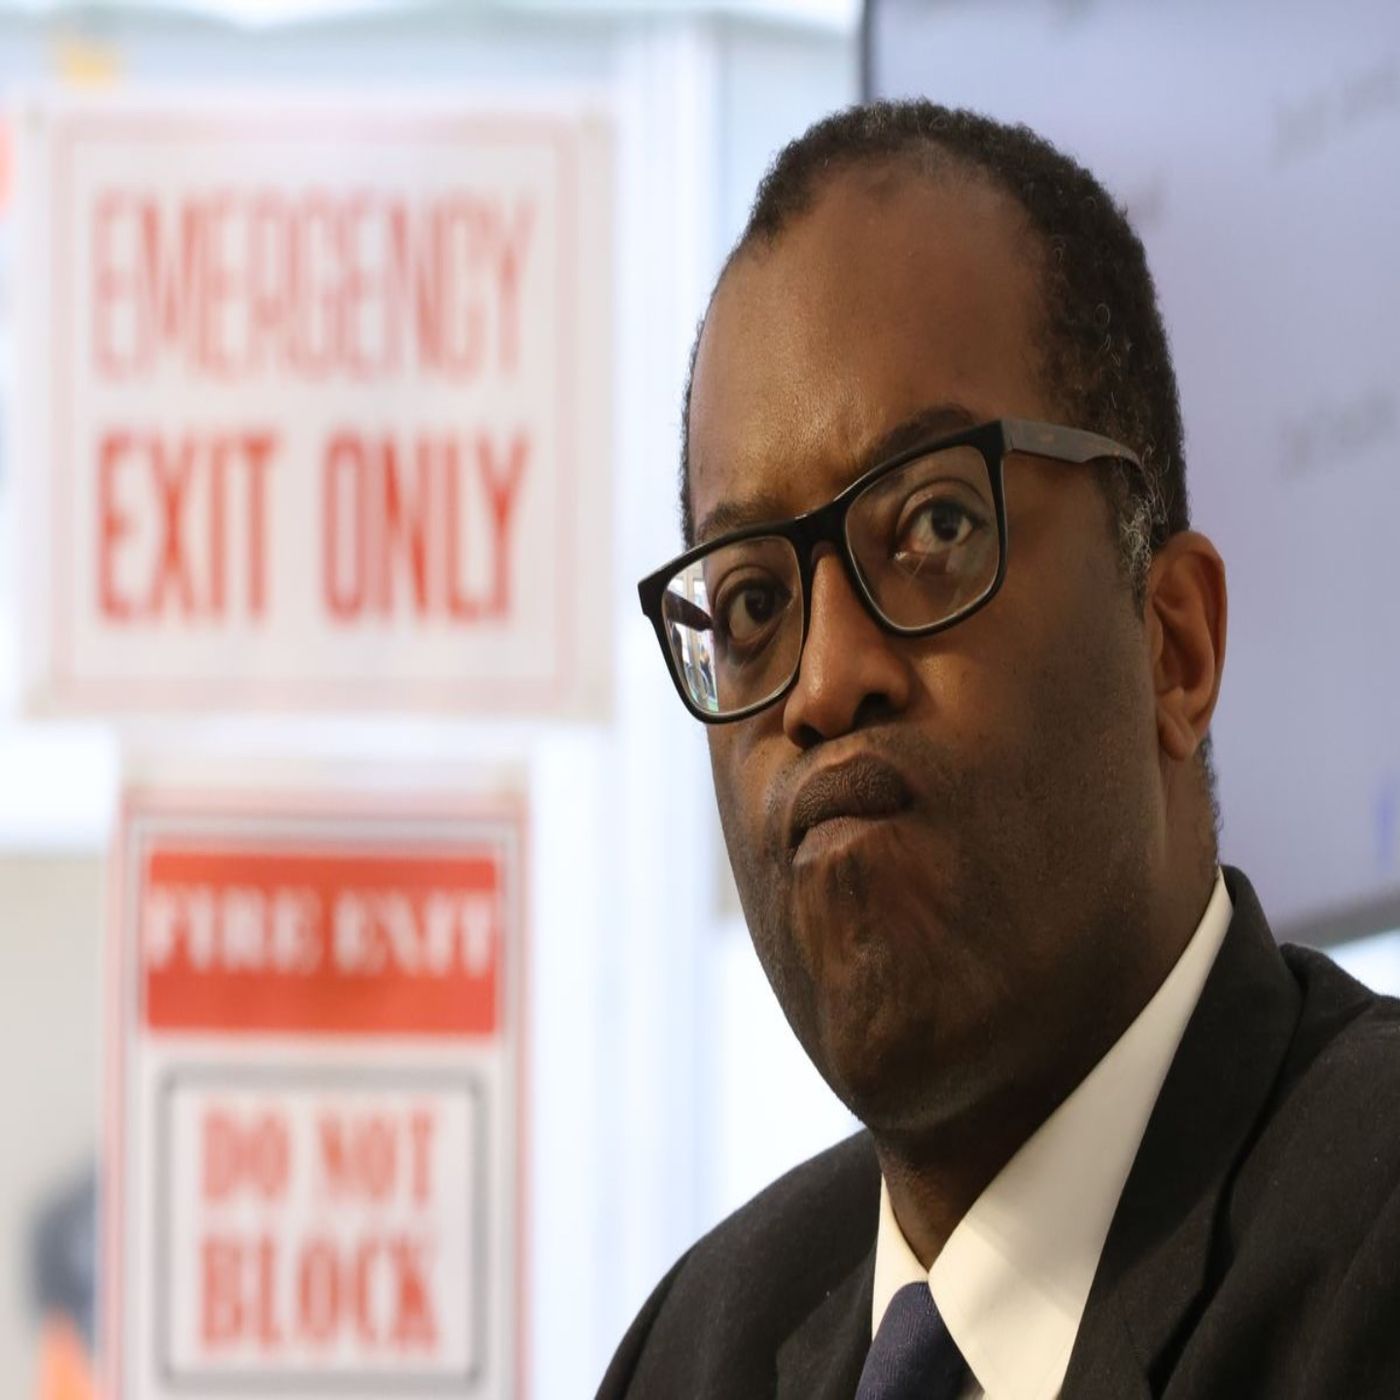 Who messed up - Kwasi Kwarteng or the IMF?